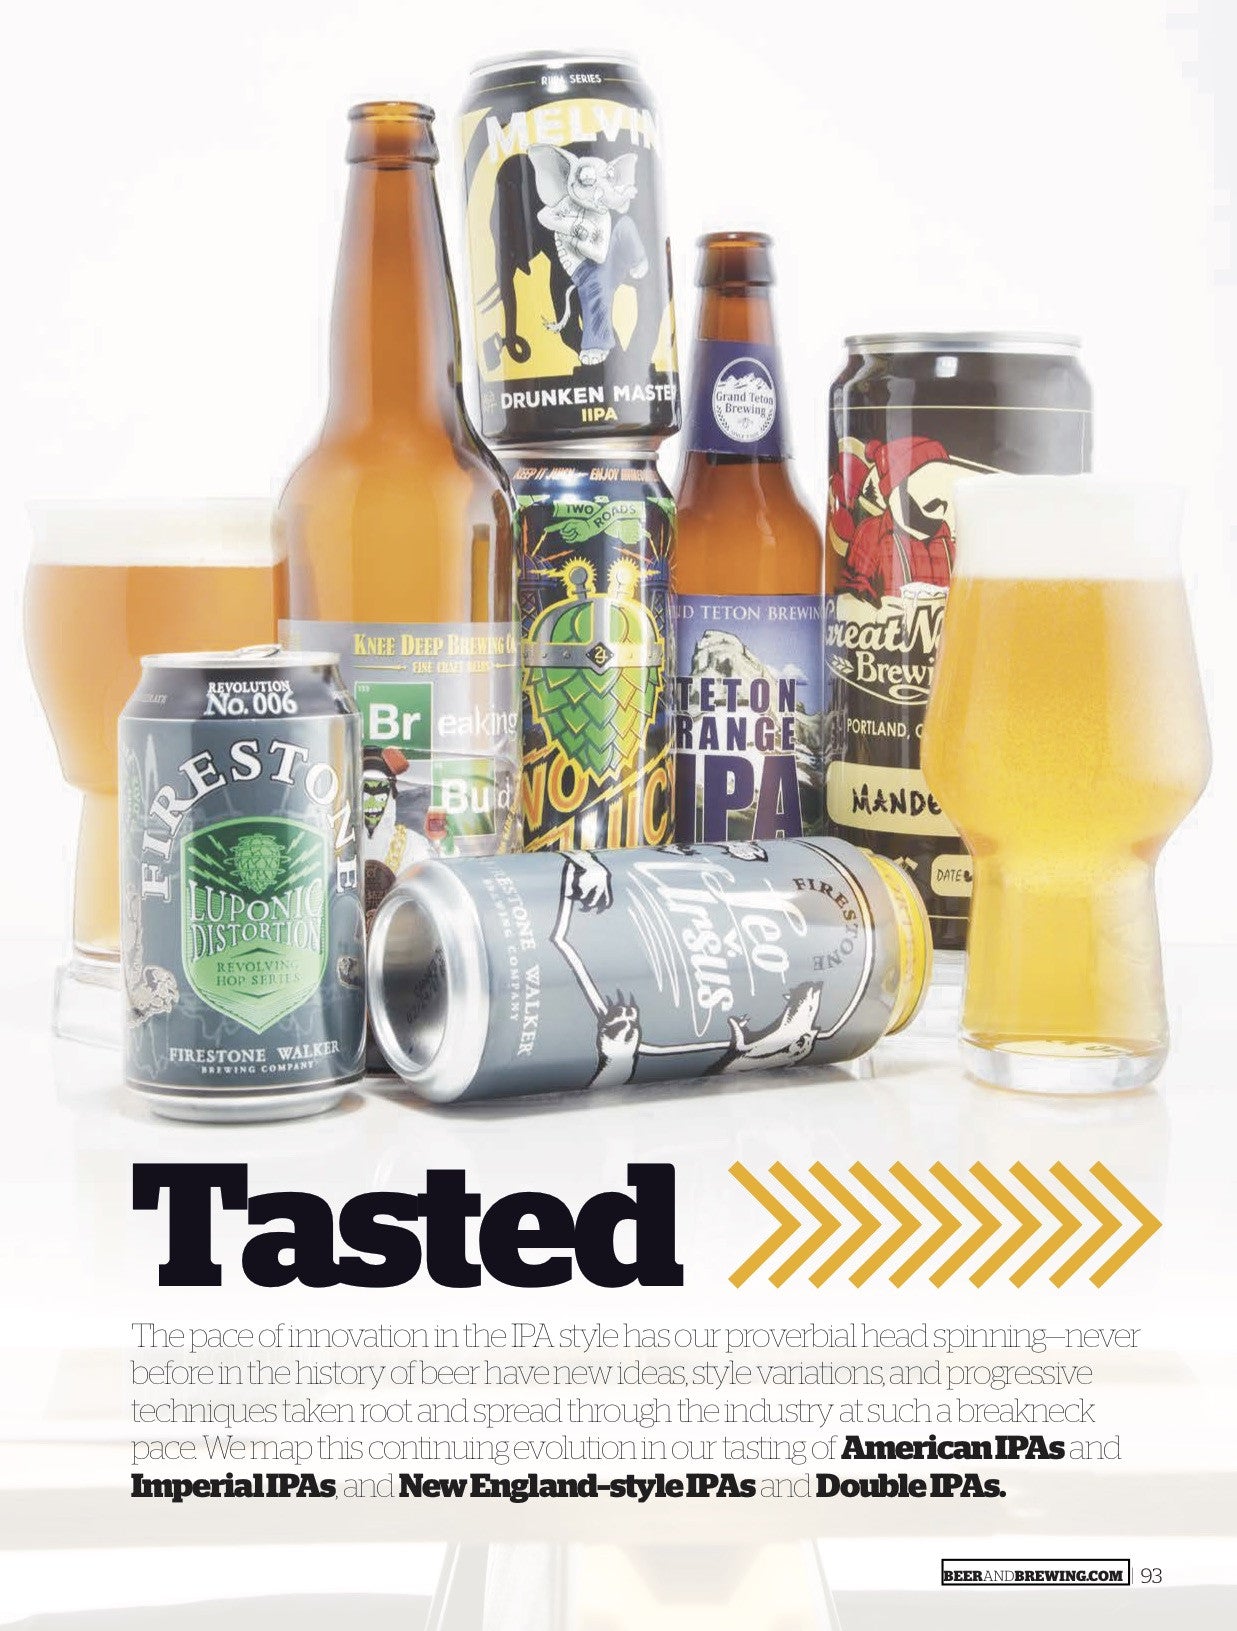 Aug-Sept 2017 Issue (IPA Today) - Craft Beer & Brewing